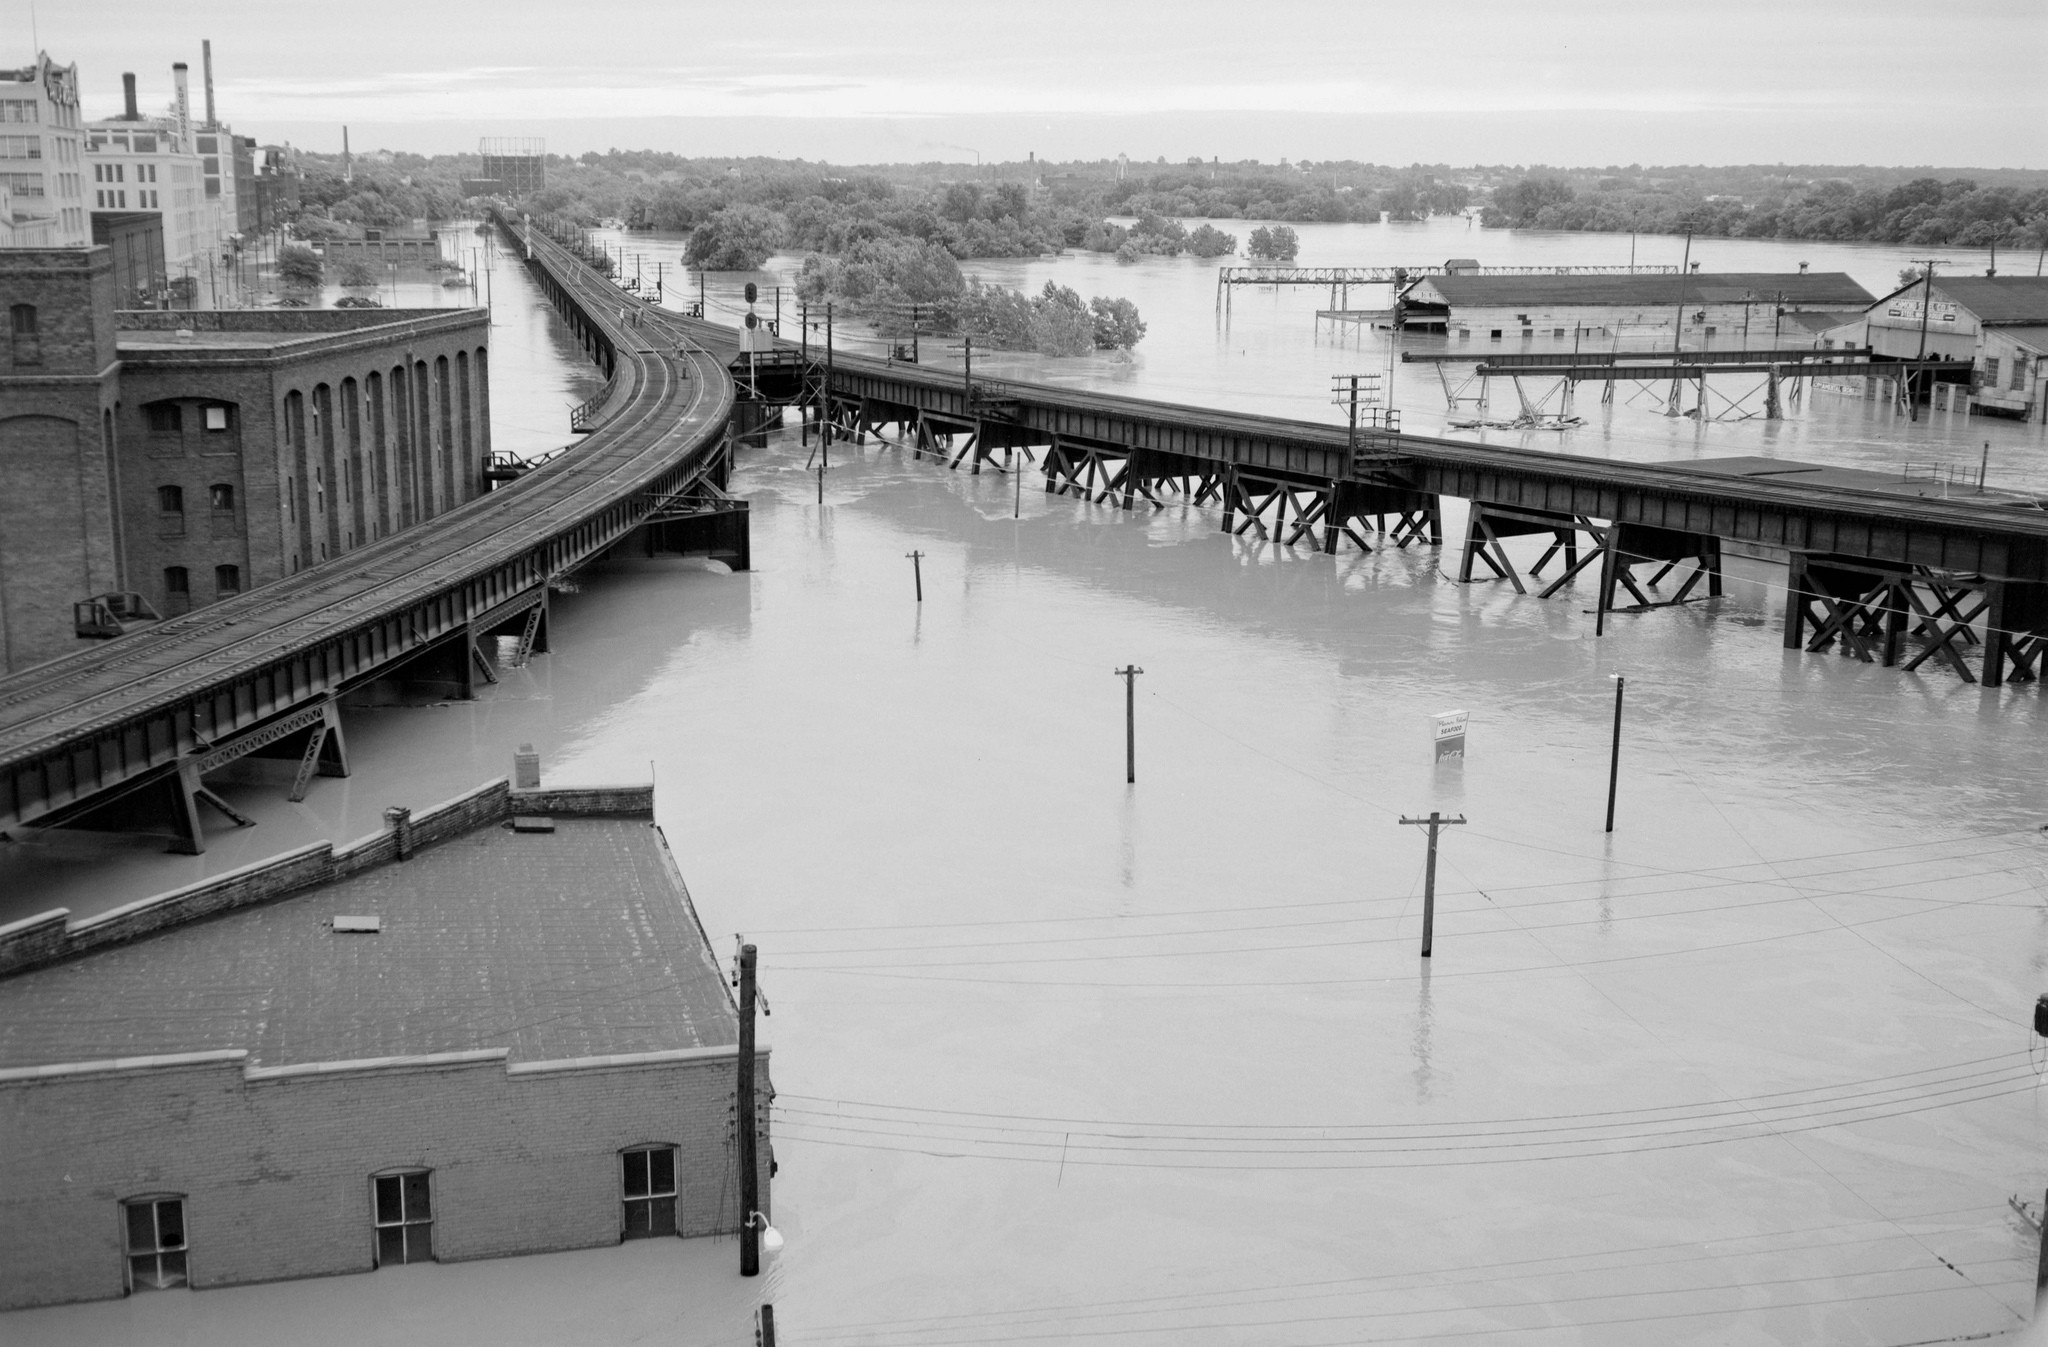 Flooding in Shockoe Bottom. This area was also flooded during Hurricane Gaston in 2004. The Bottom's Up Pizza Building is visible in the bottom left corner. - THE LIBRARY OF VIRGINIA